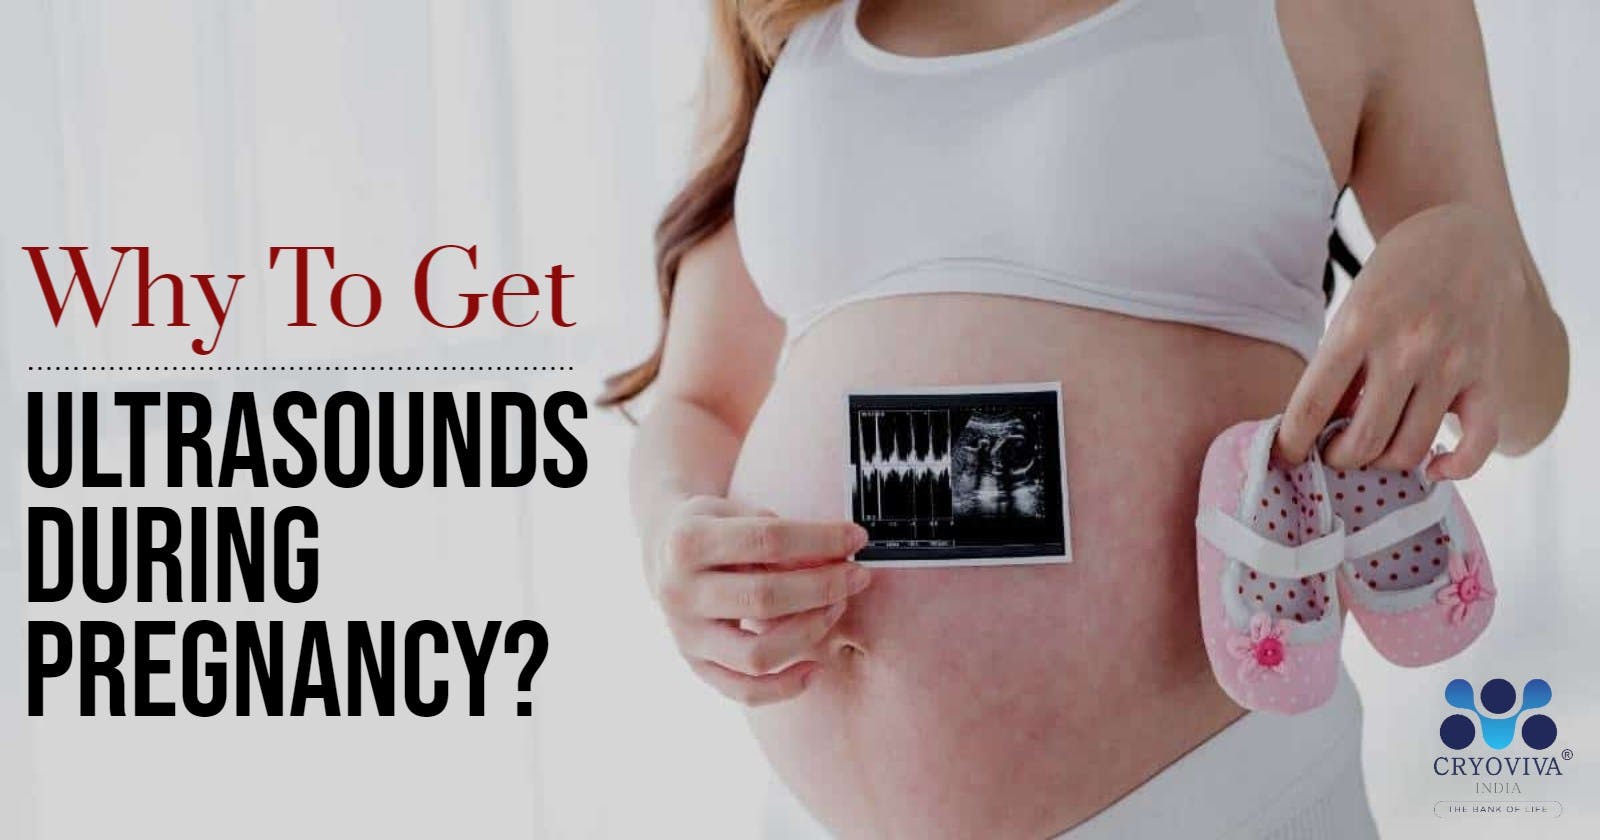 Why To Get Ultrasounds during Pregnancy?